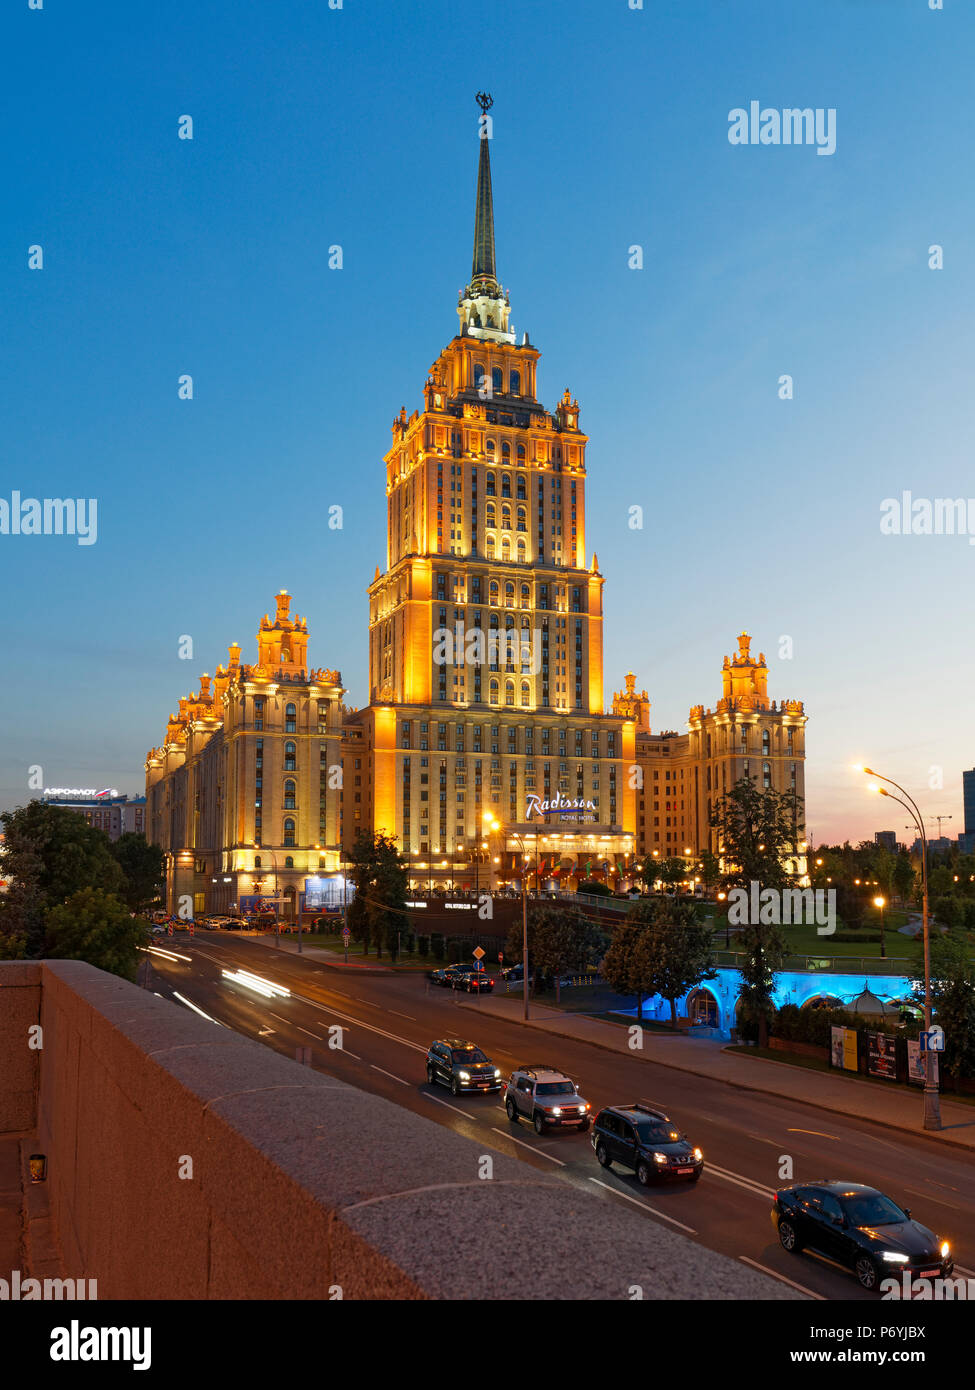 Radisson Royal Hotel Stalinist style high-rise building illuminated at dusk. Moscow, Russia. Stock Photo